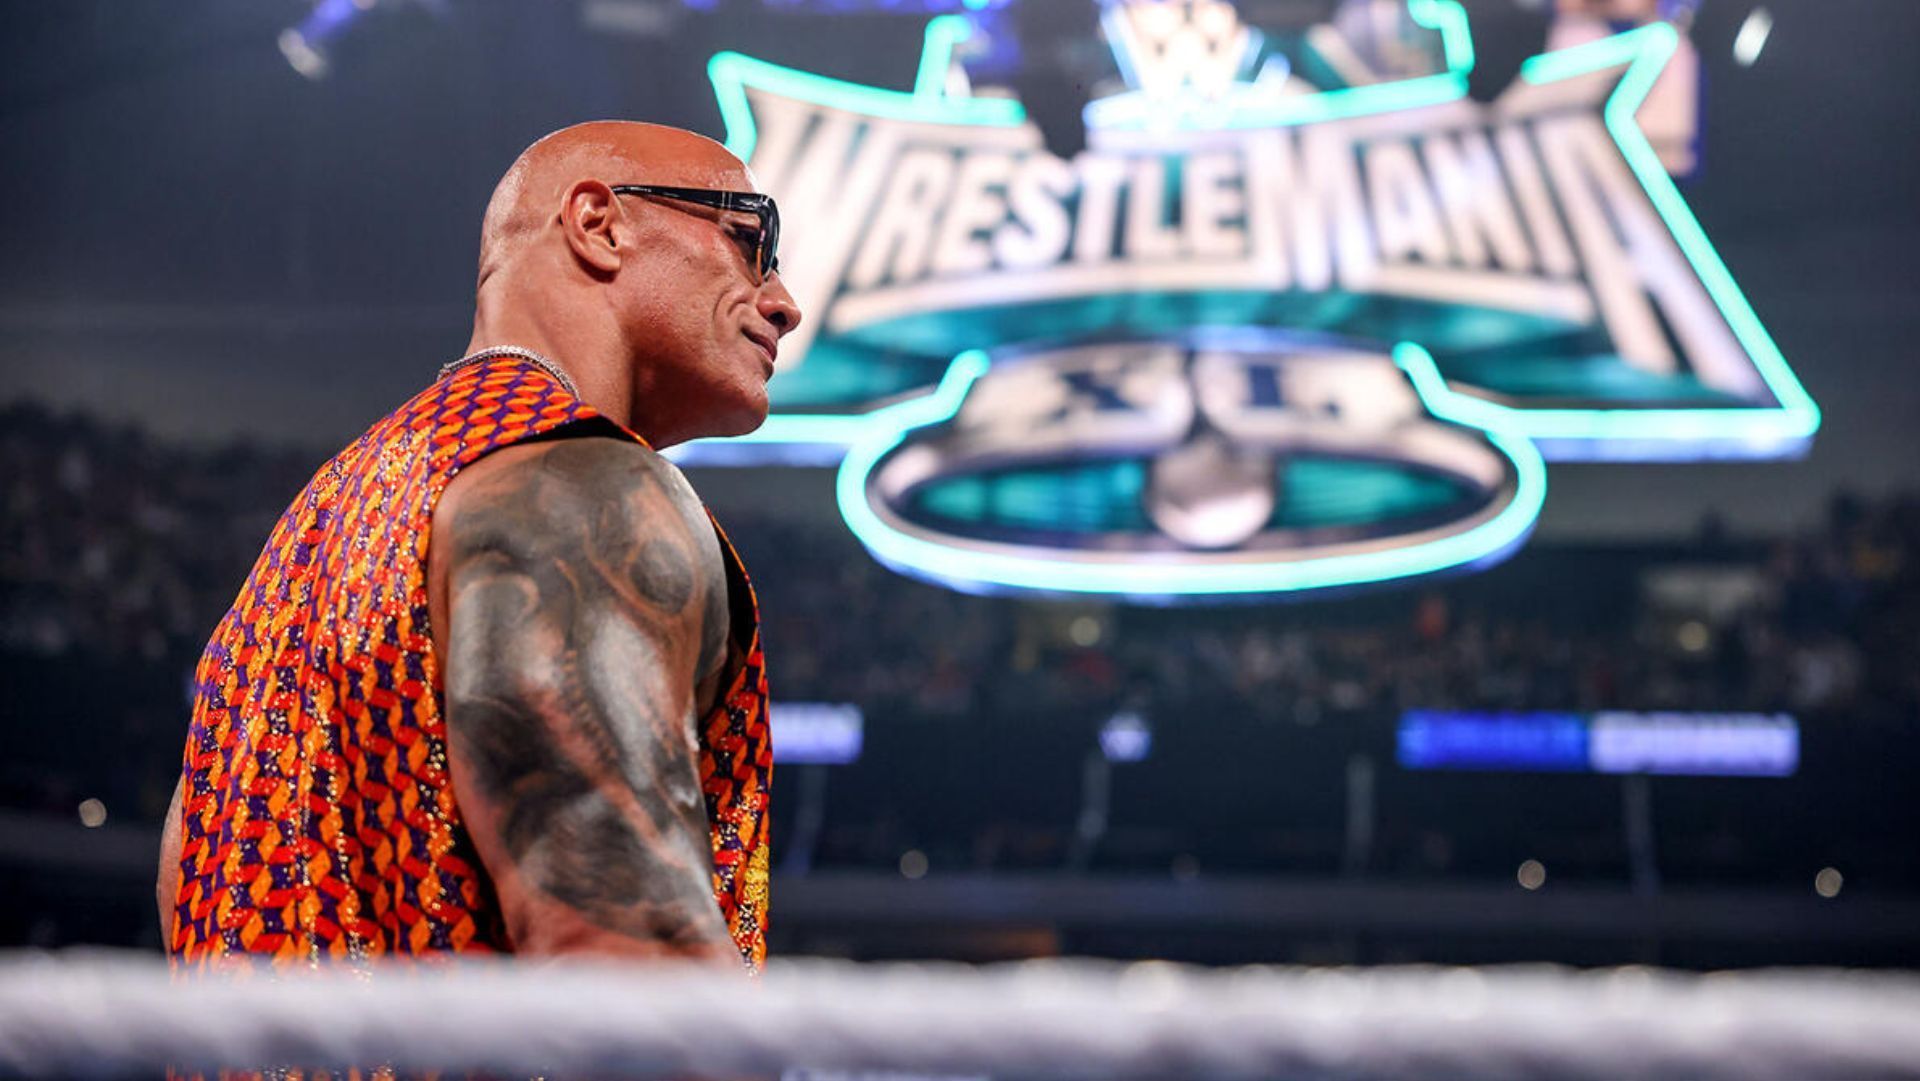 The Rock returned to WWE to save WrestleMania 40.